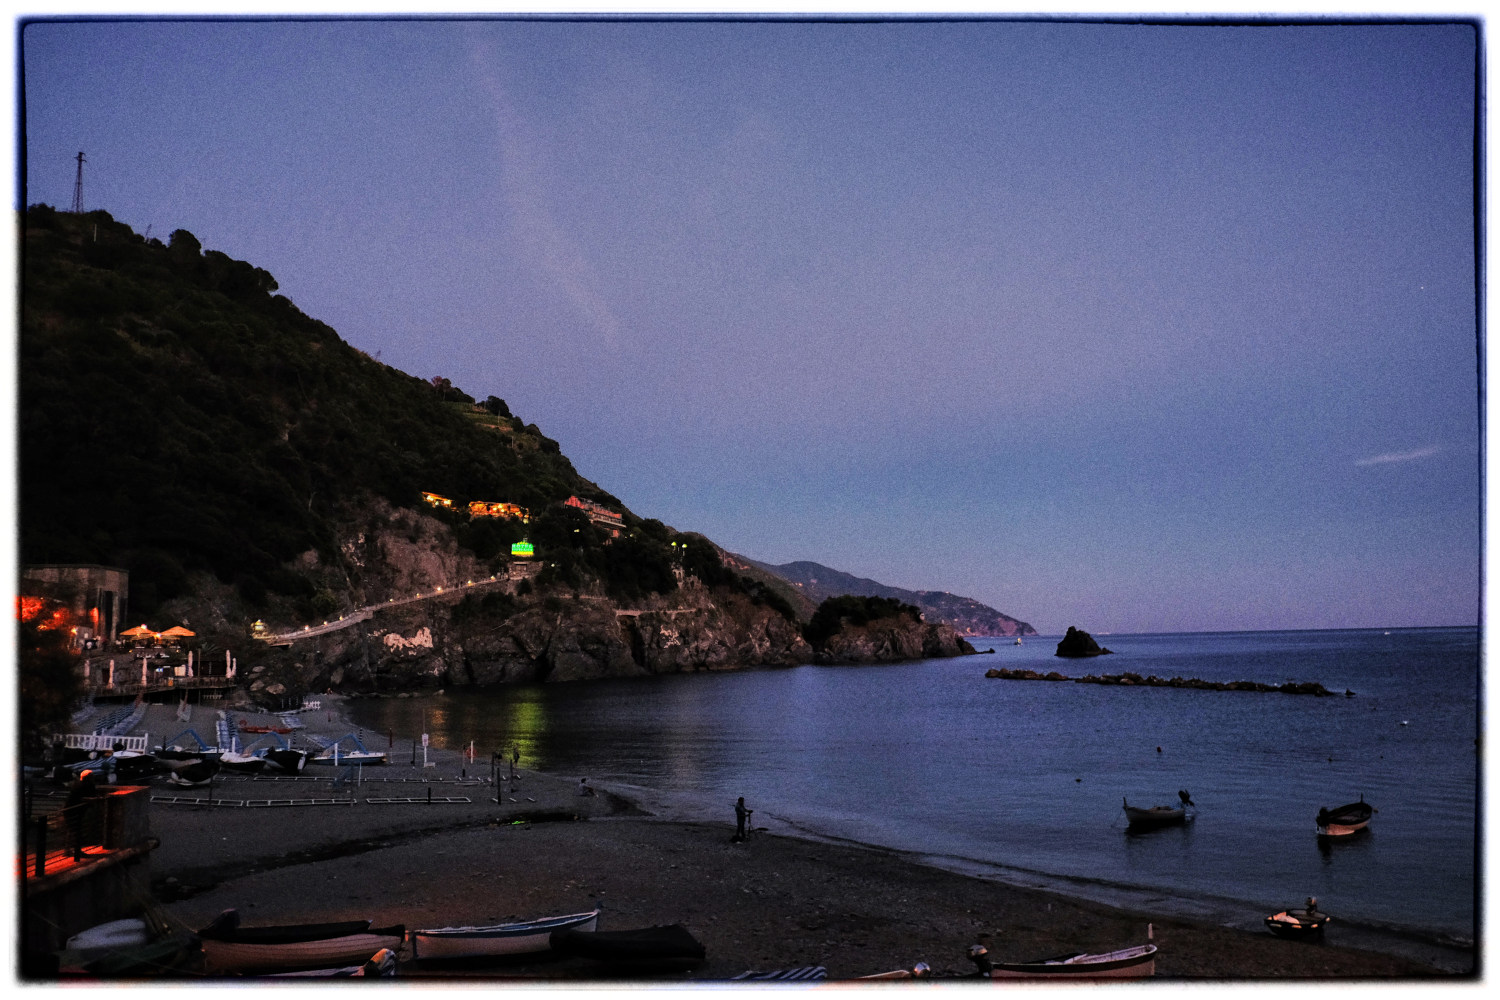 A view of Cinque Terre in the evening from Monterosso al Mare SP, Italy. Food and travel photography by Kent Johnson